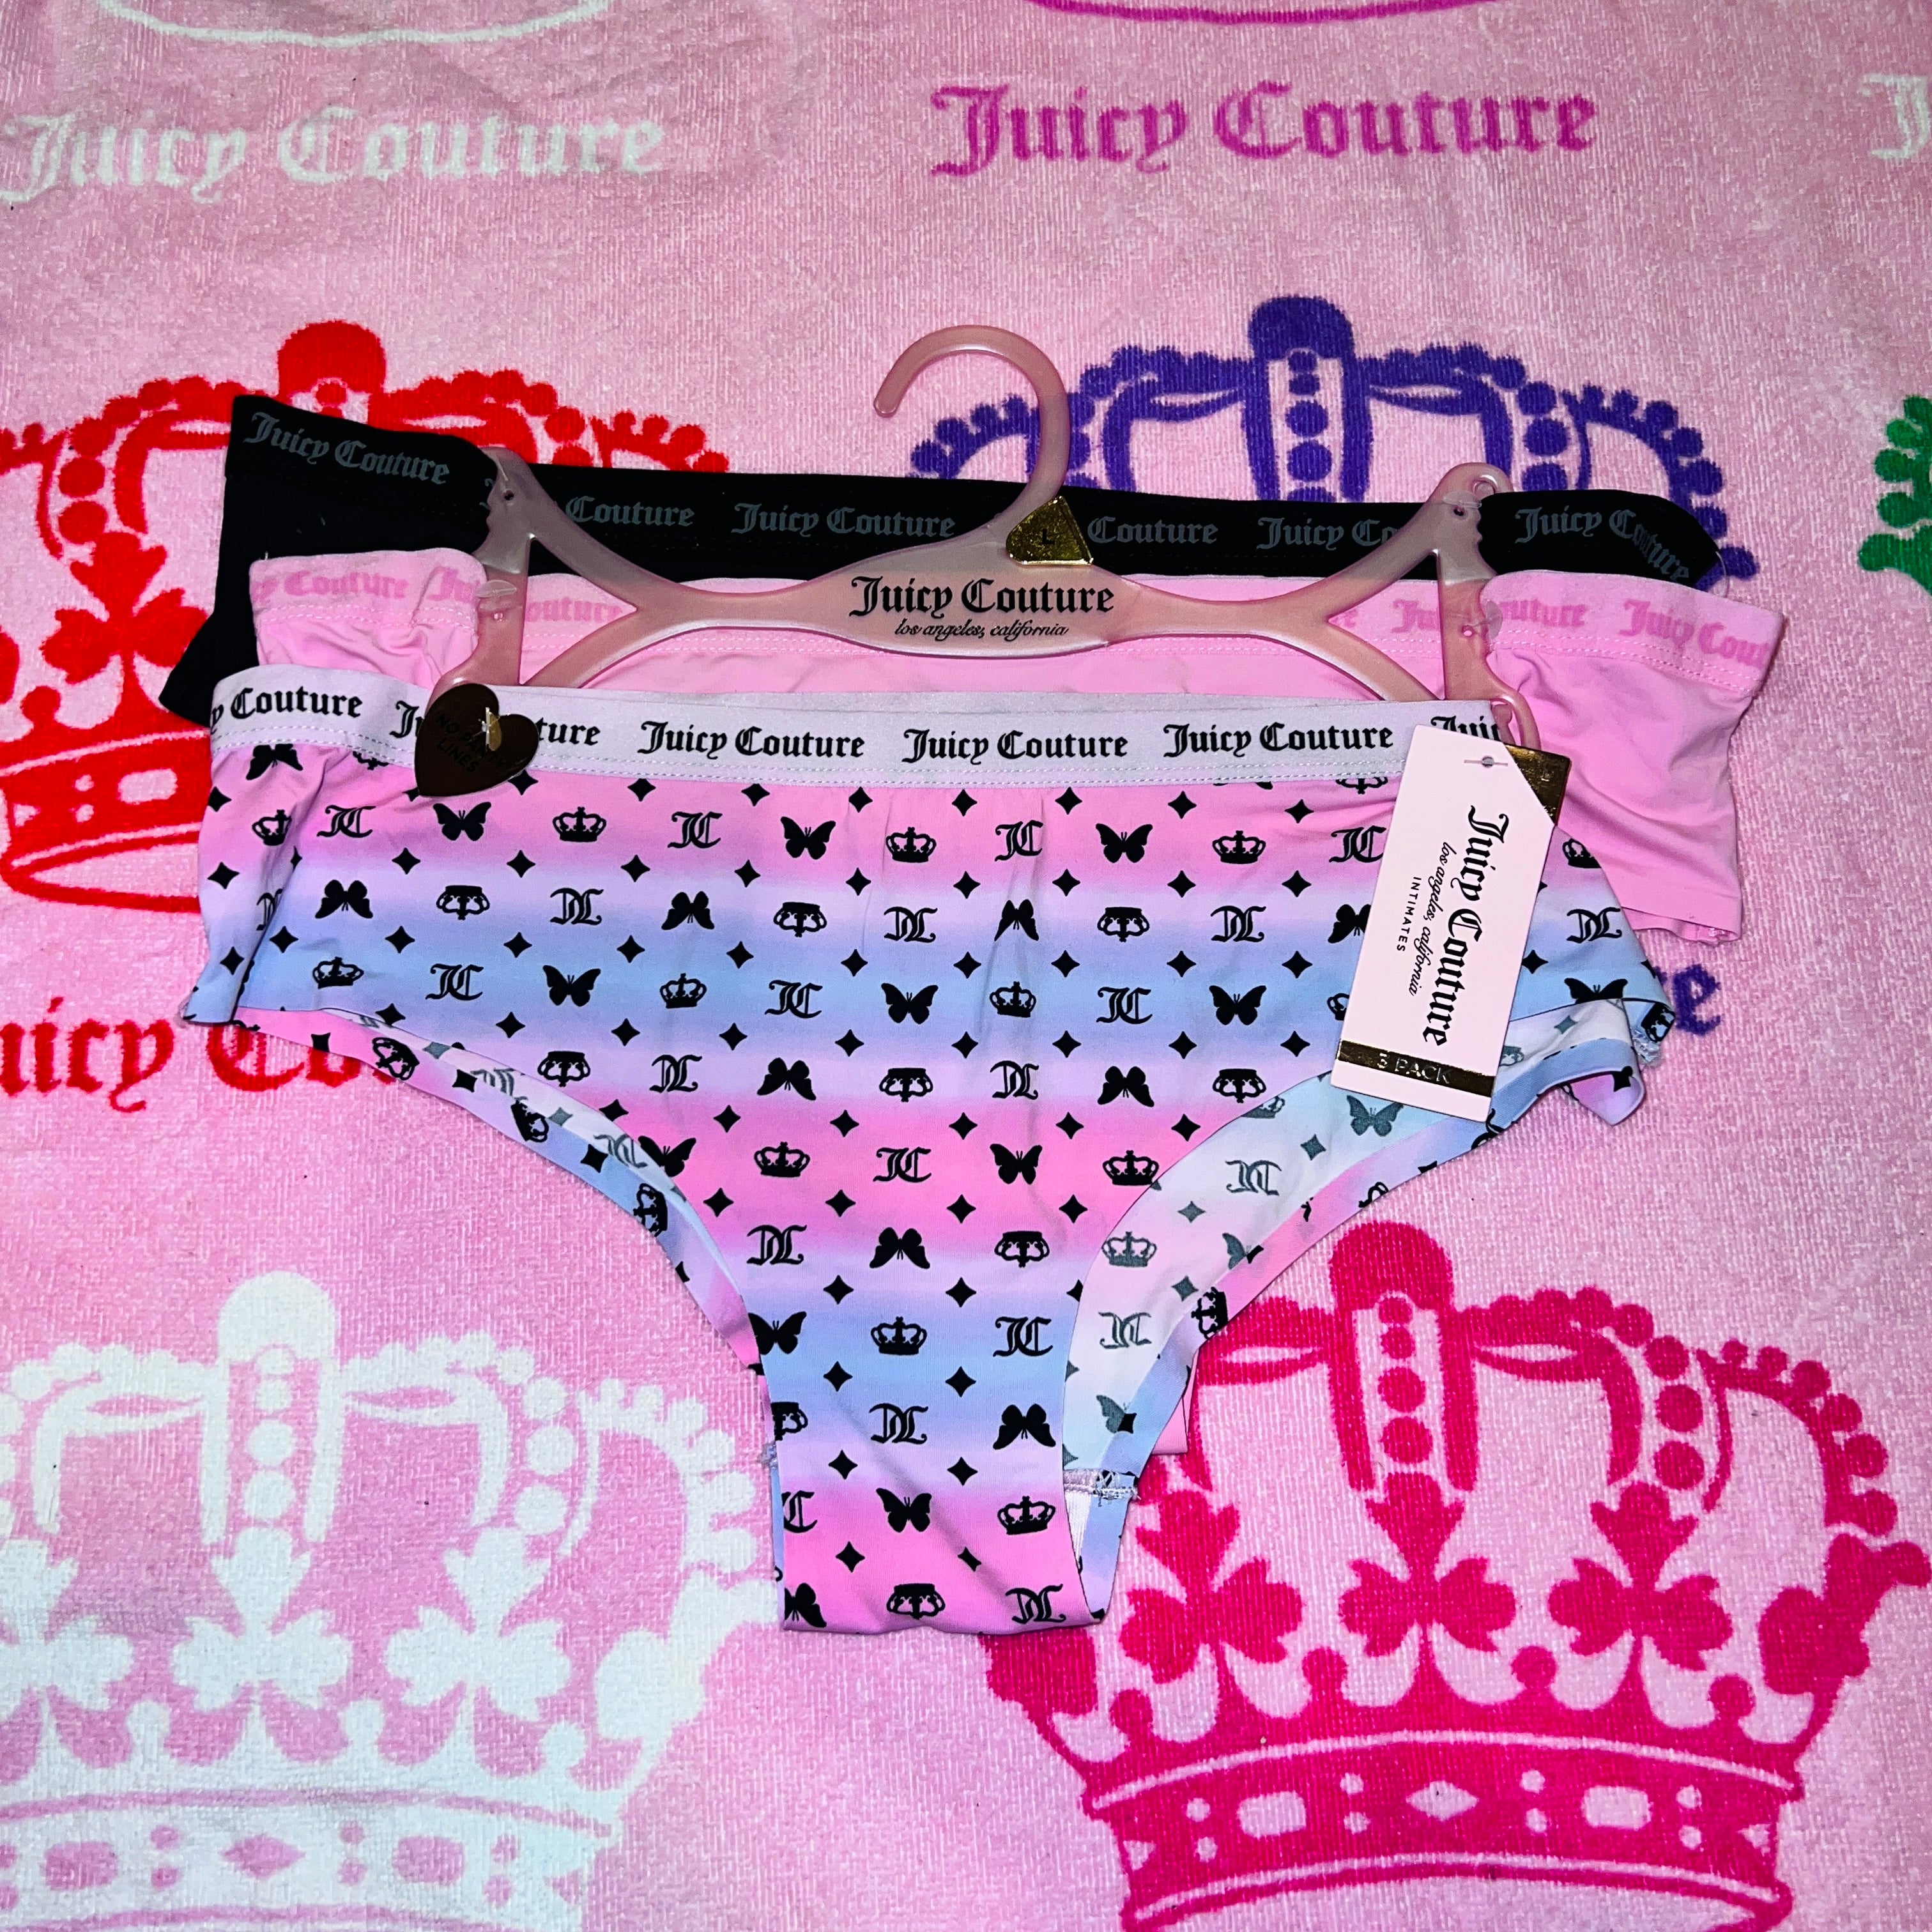 New Juicy Couture Underwear 3 Pack Size Large - Pink Cherry Print, Red,  Black 